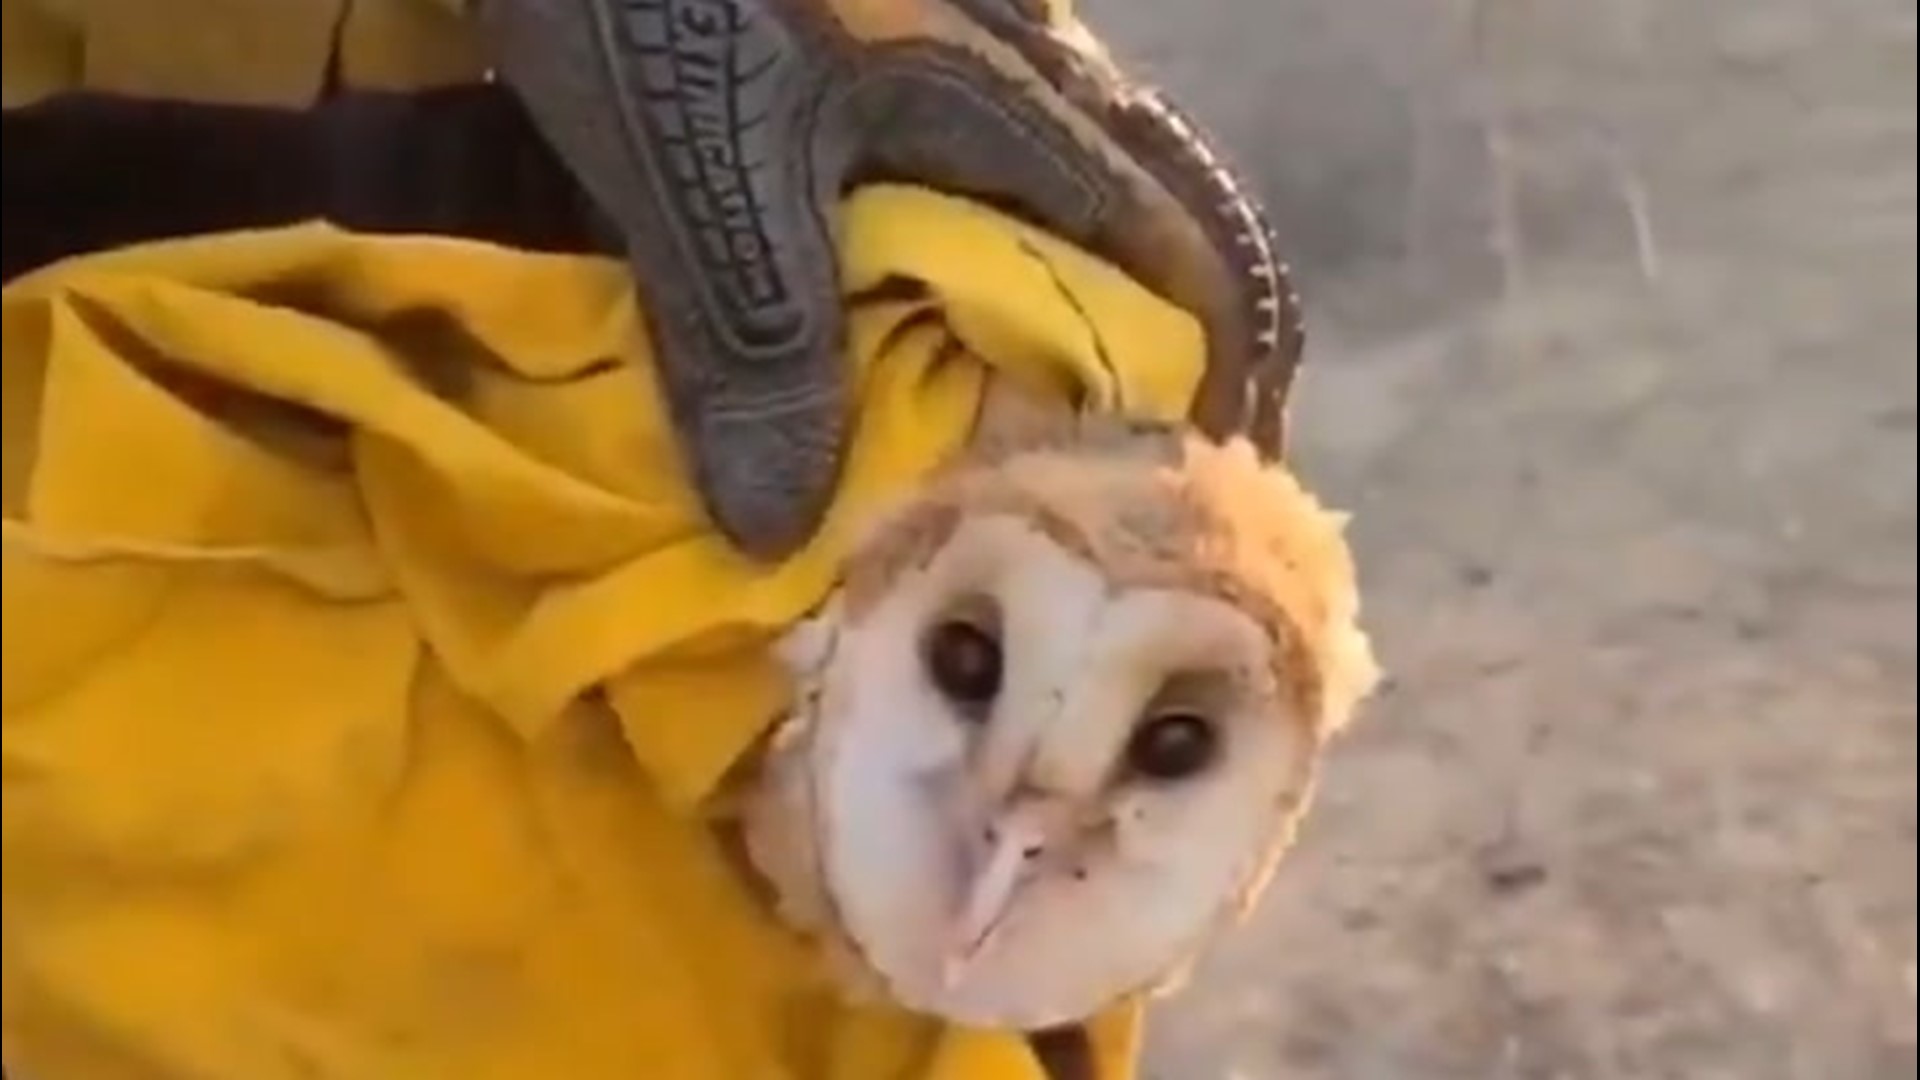 Firefighters in California rescued a barn owl after coming across it while battling the Silverado Fire on Oct. 27. The owl was injured in the blaze, but is said to be safe.